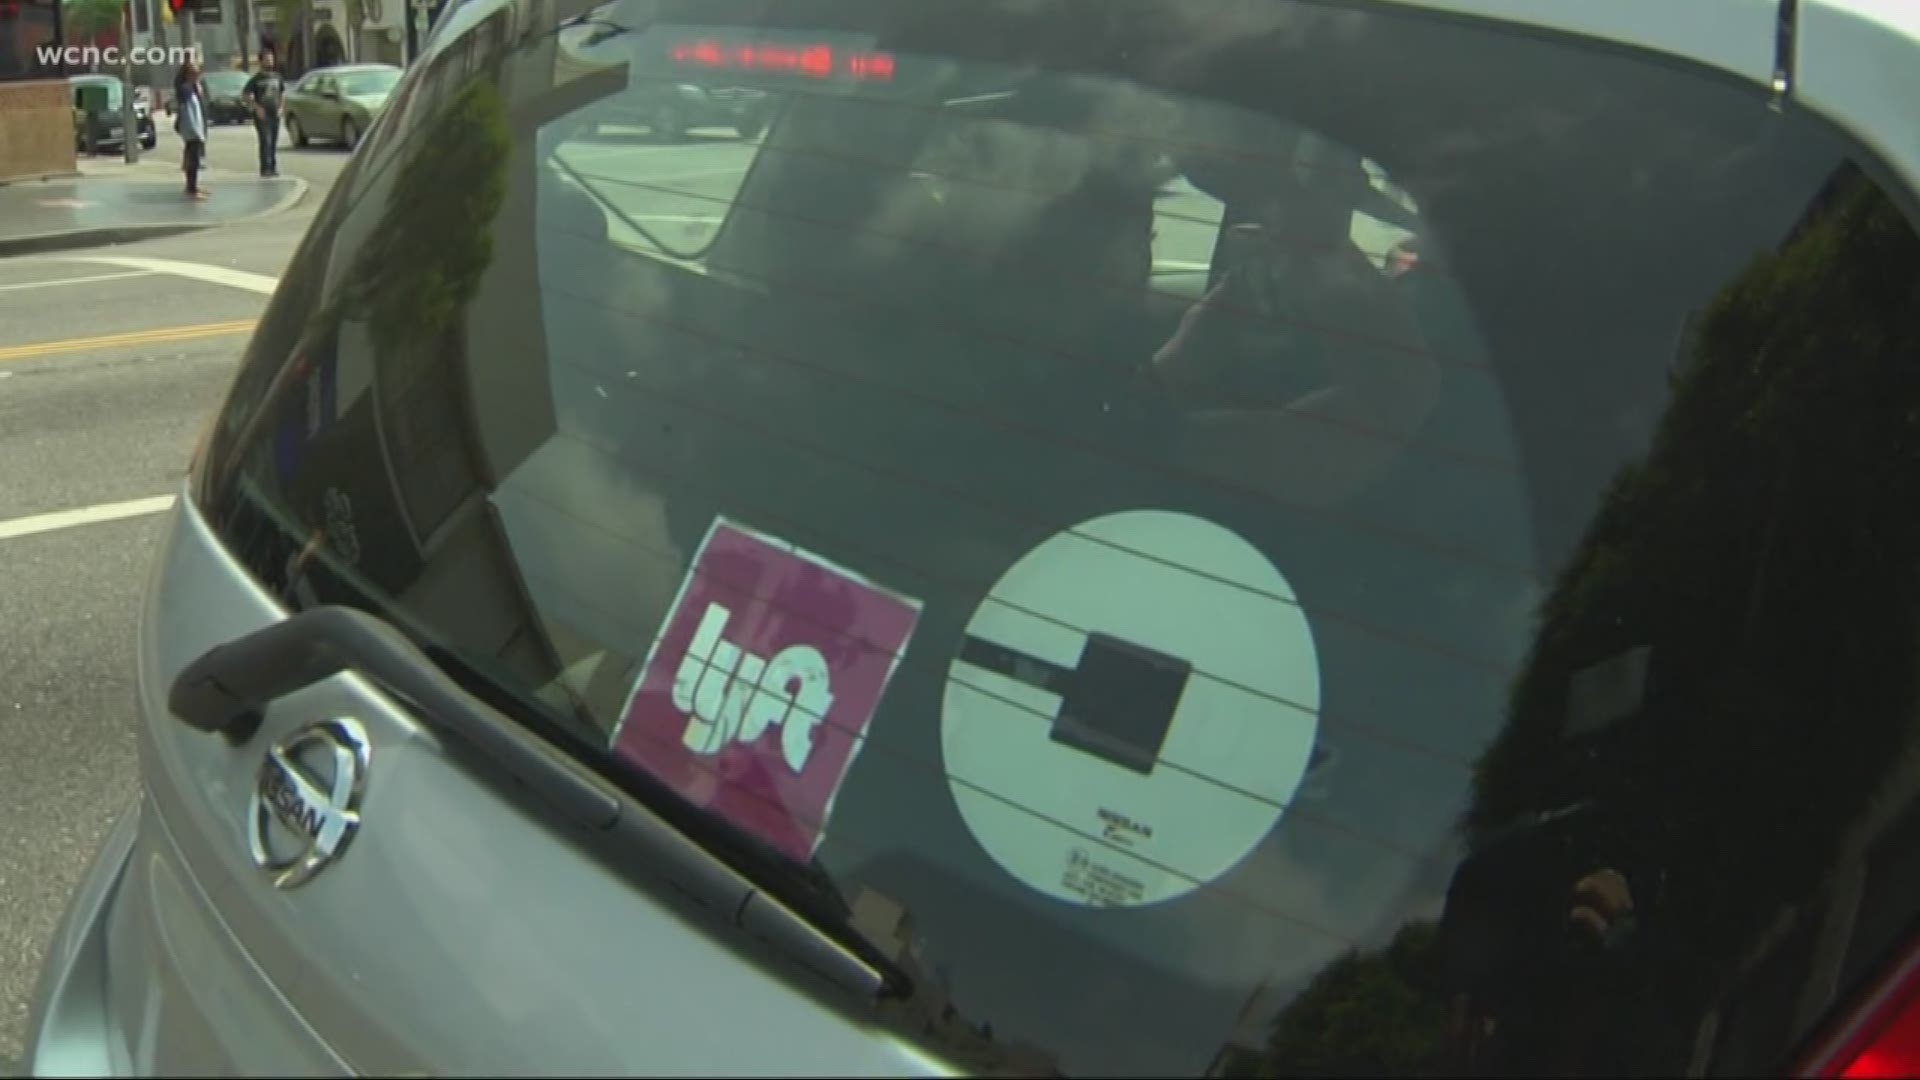 Ride-sharing service Lyft is adding some new safety features for customers, including an emergency assist button within the app.